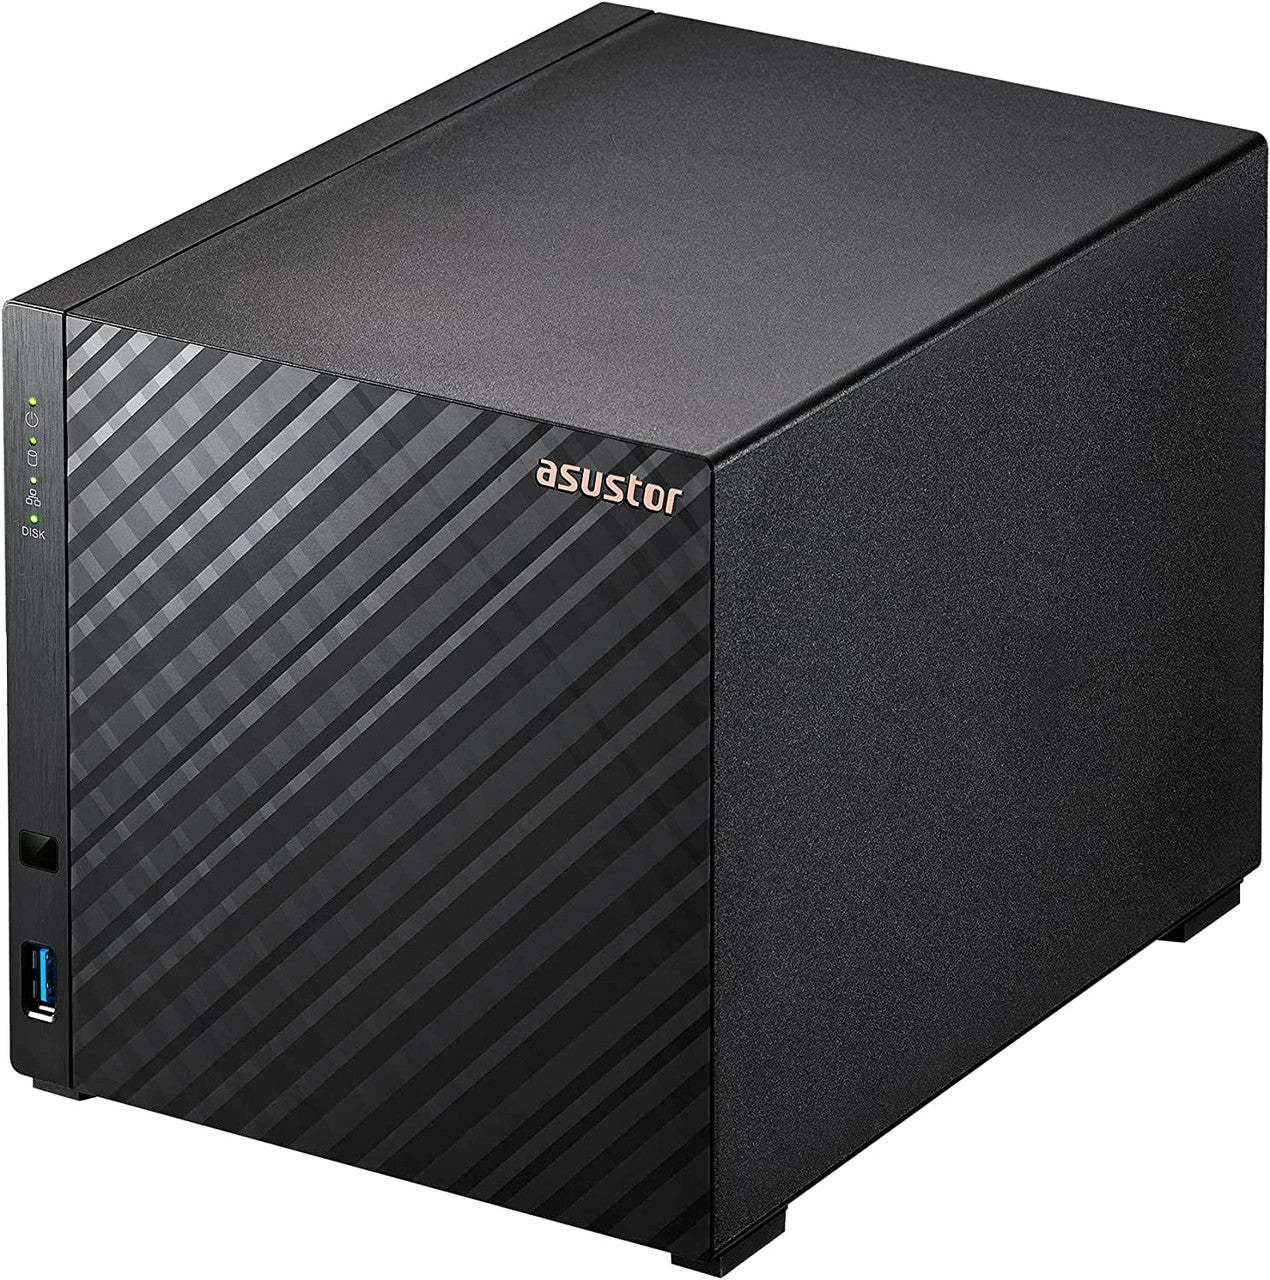 Asustor AS1104T 4-Bay Drivestor 4 NAS with 1GB RAM and 48TB (4x12TB) Seagate Ironwolf PRO Drives